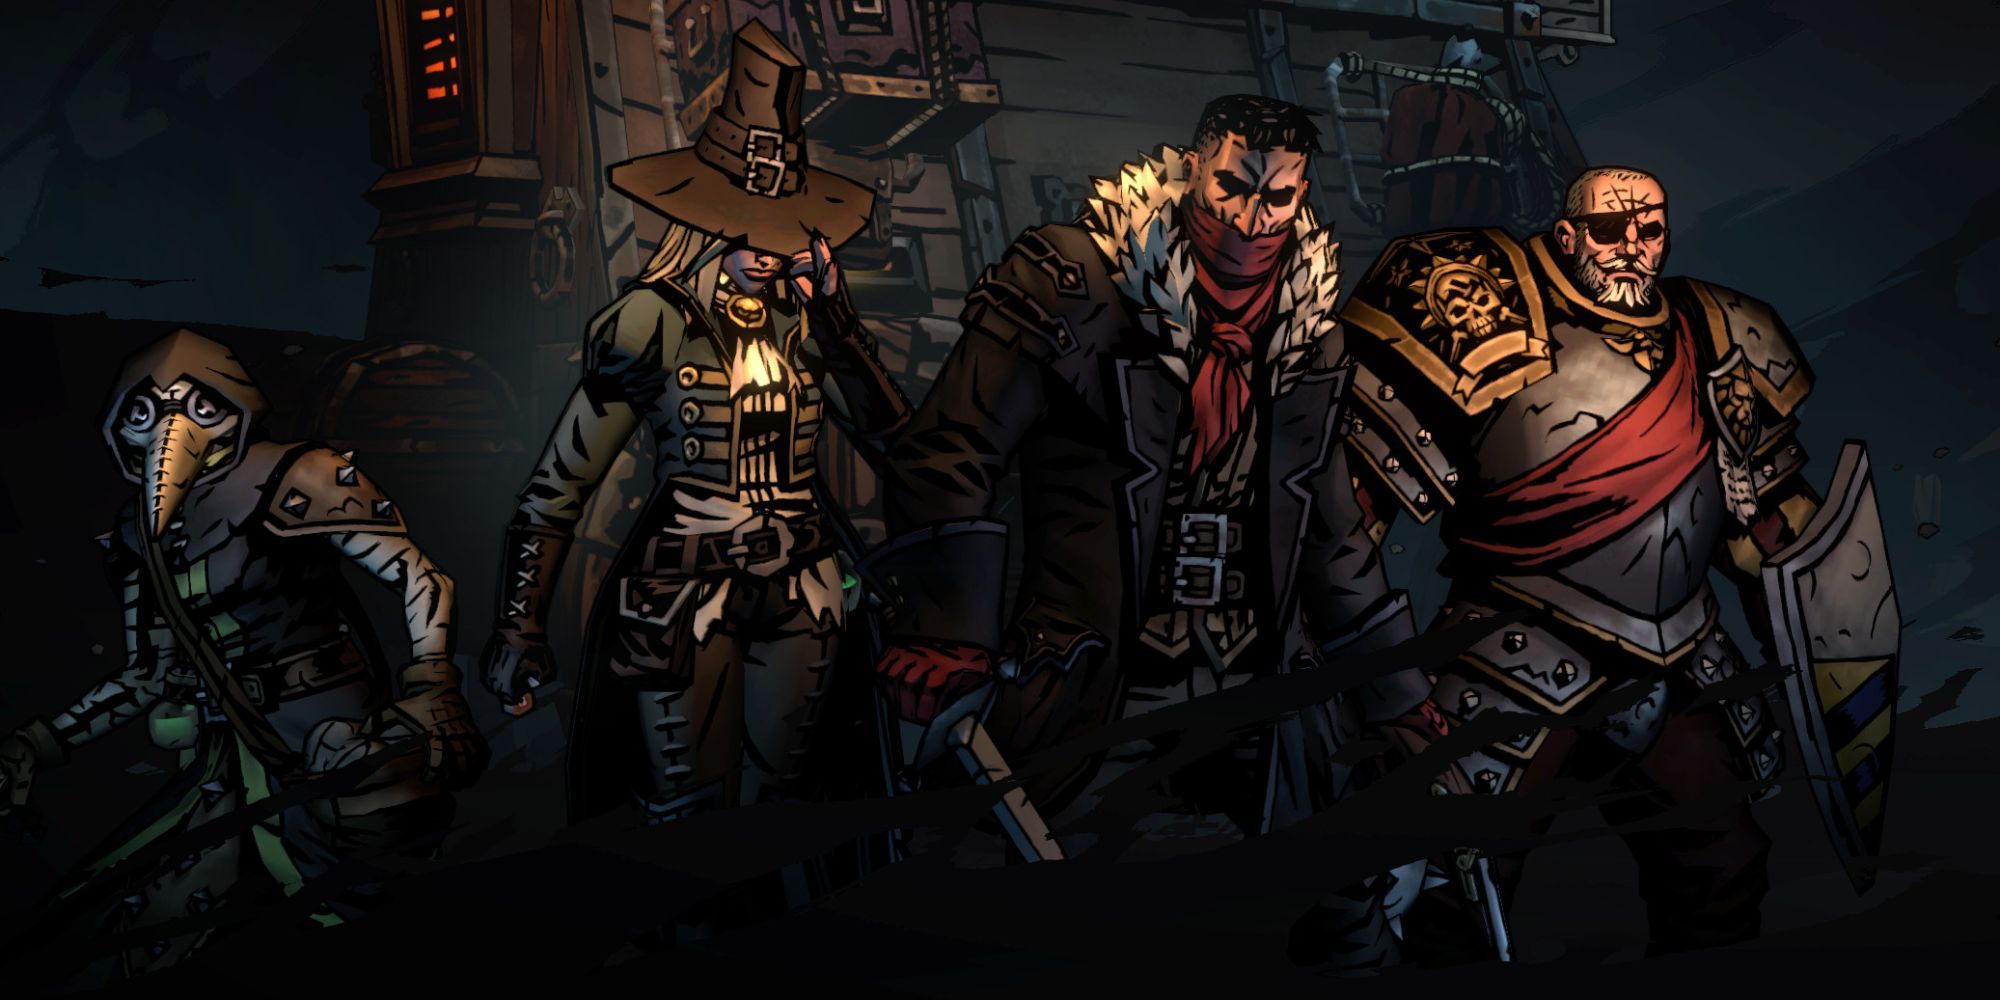 Darkest Dungeon 2 Plague Doctor Grave Strength Man at Arms and Highwayman All Stand by Cart